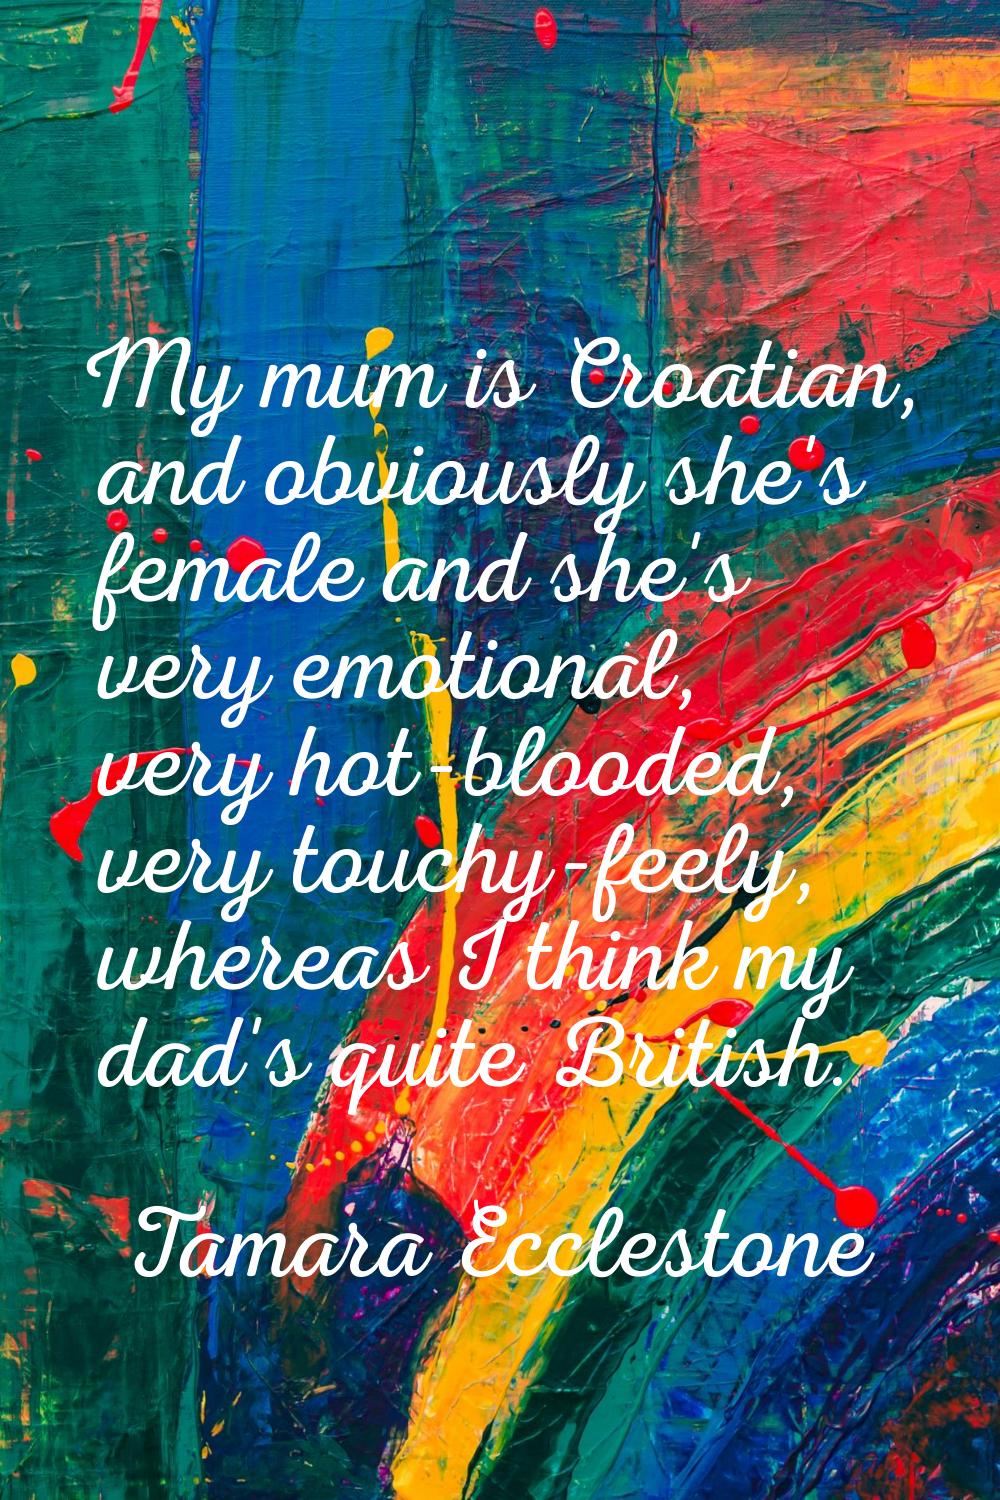 My mum is Croatian, and obviously she's female and she's very emotional, very hot-blooded, very tou